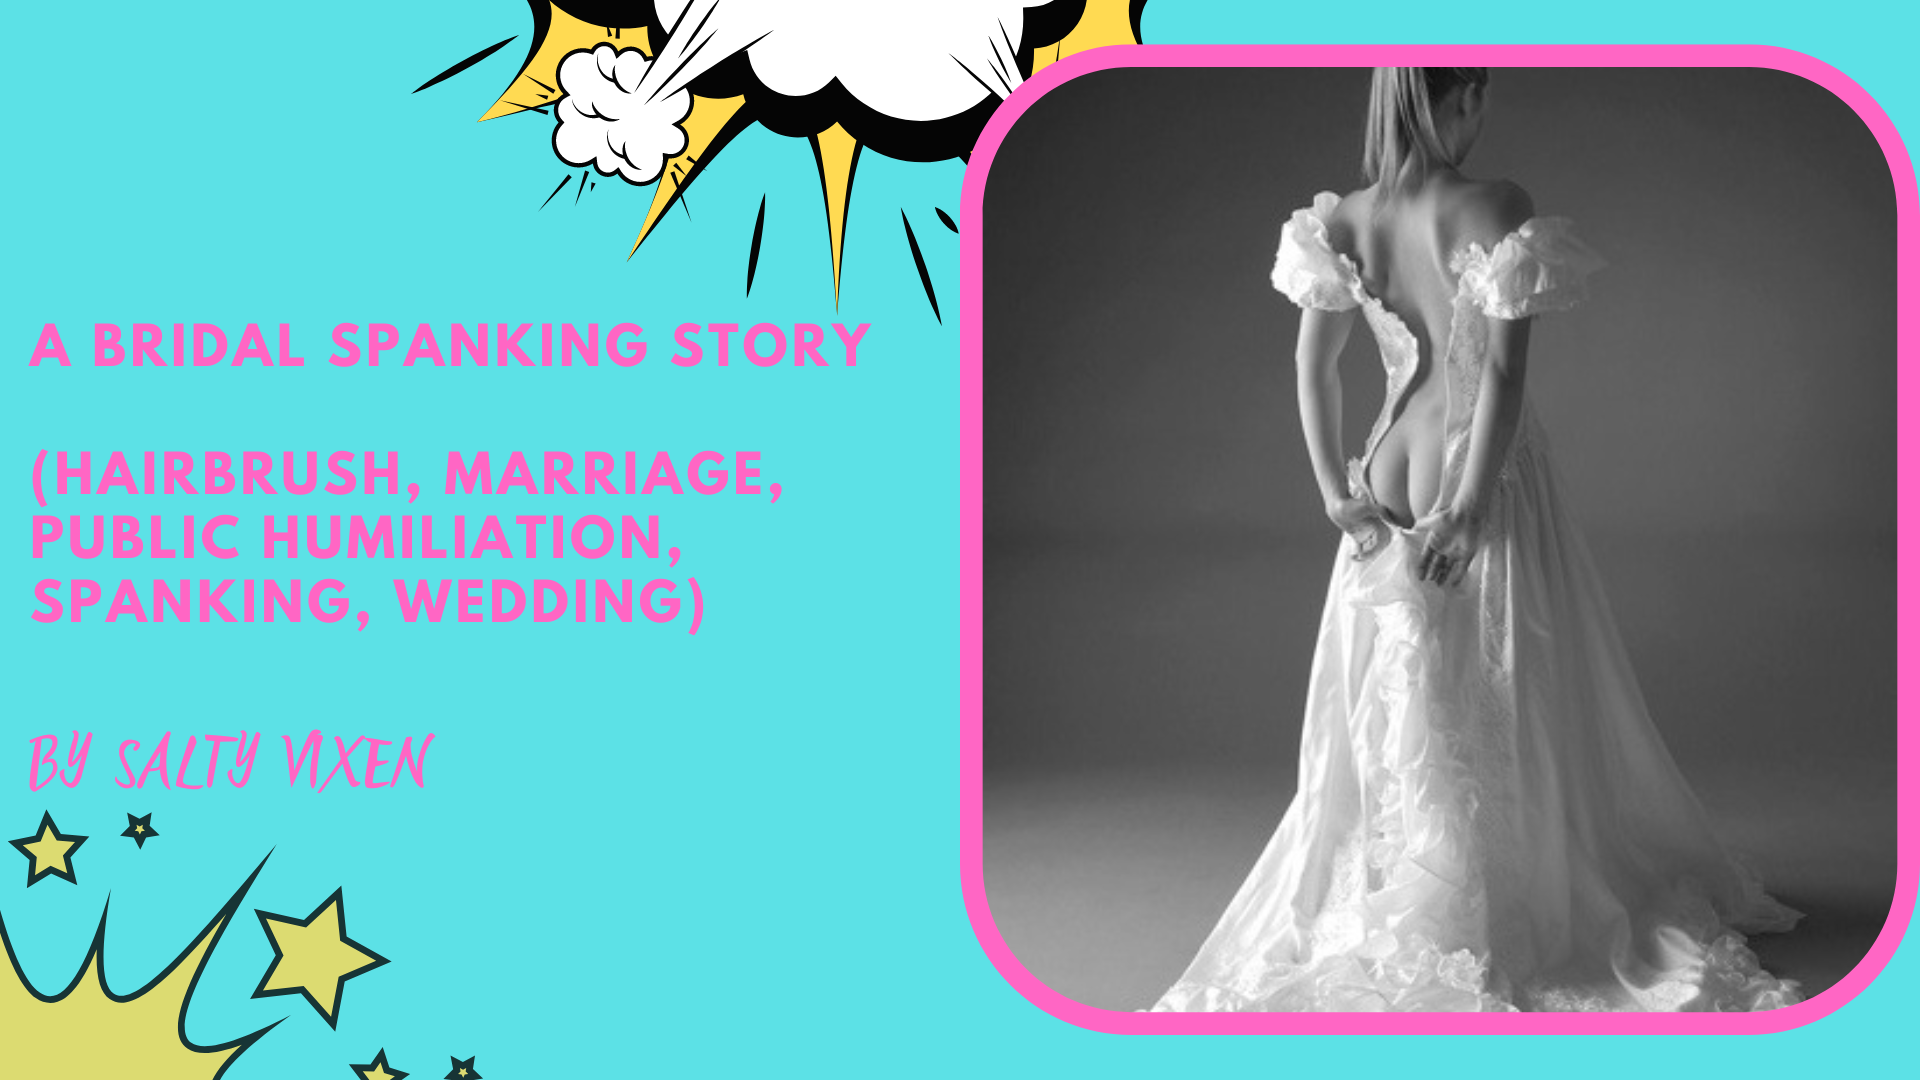 A Bridal Spanking Story (hairbrush, public humiliation, spanking) ~ Salty Vixen Stories and More